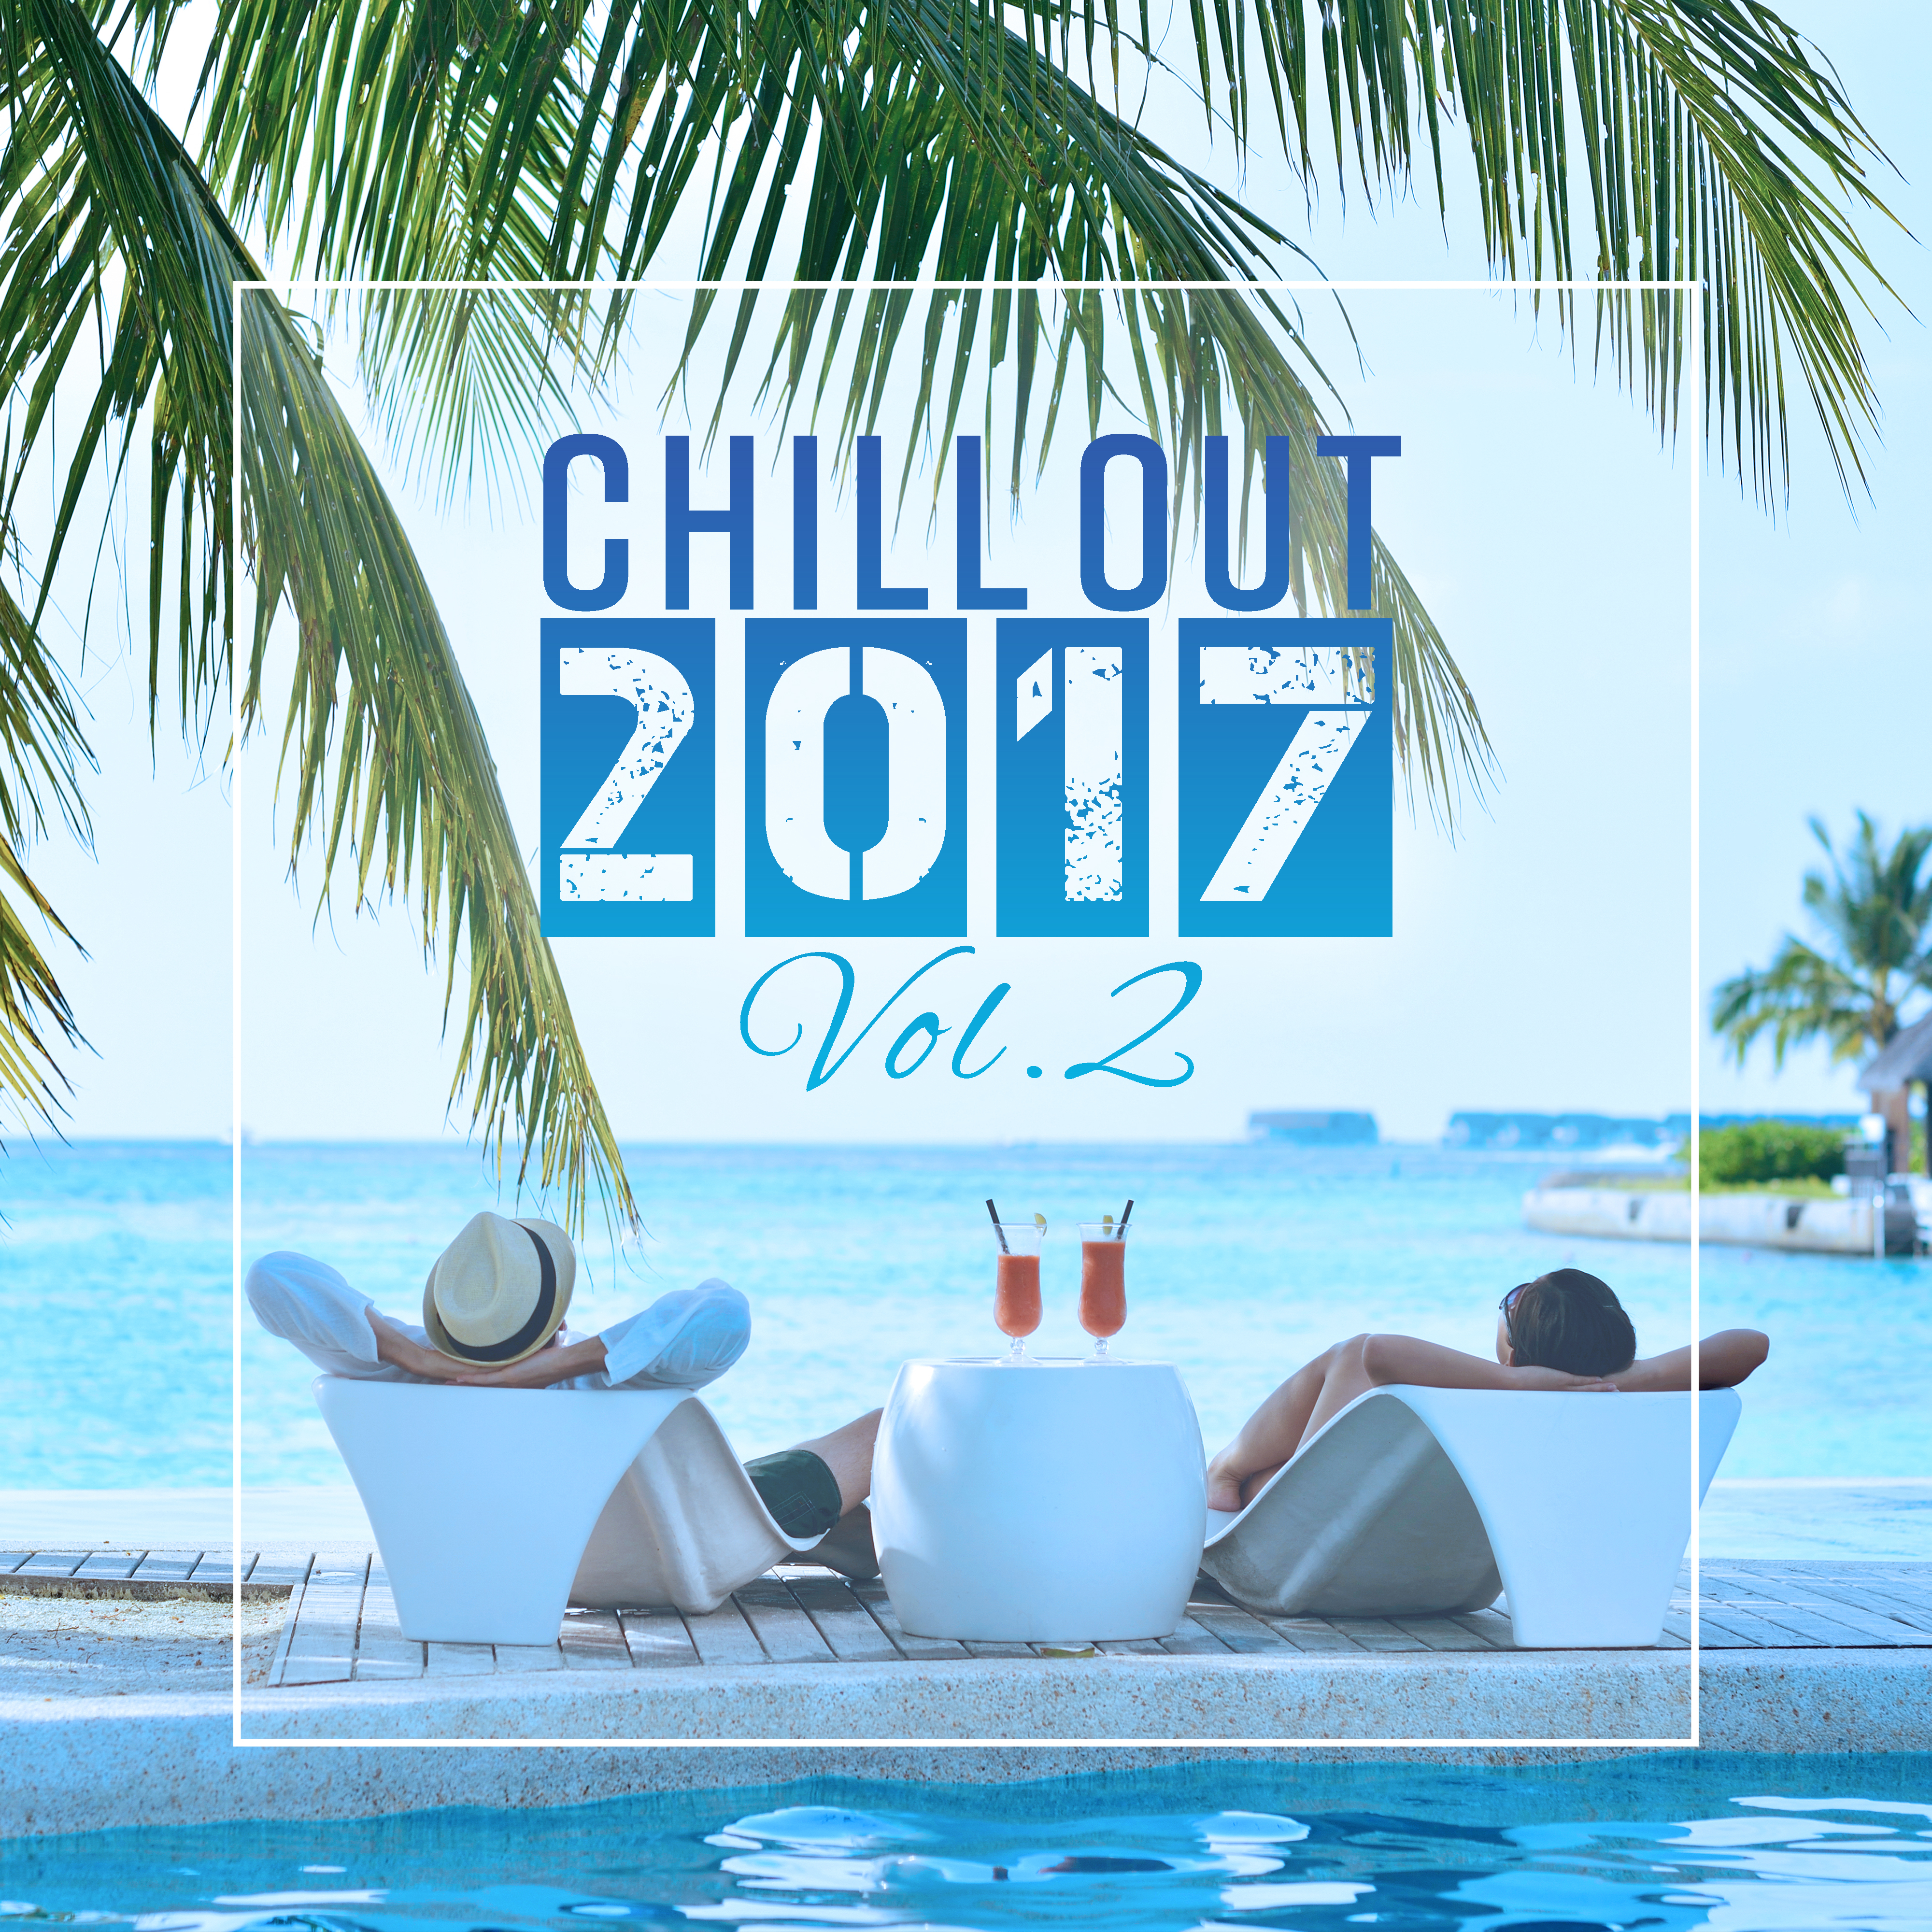 Chill Out 2017 Vol. 2  Fresh Beats, Chill Out  Music, Summer, Lounge, Relax  Chill